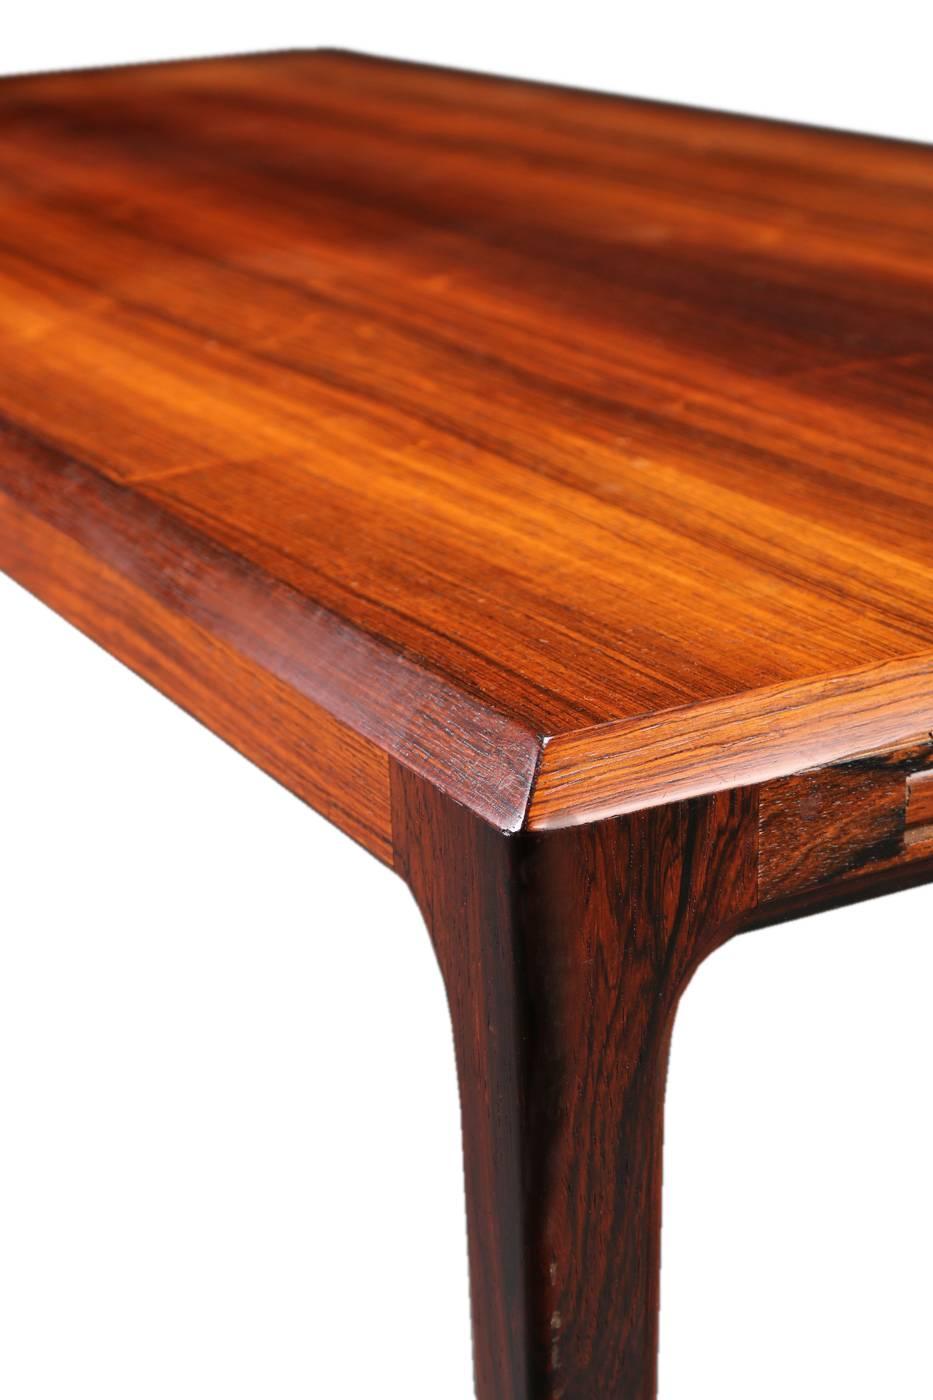 20th Century Danish Mid-Century Rosewood Coffee Table by Johannes Andersen for CFC Silkebor For Sale